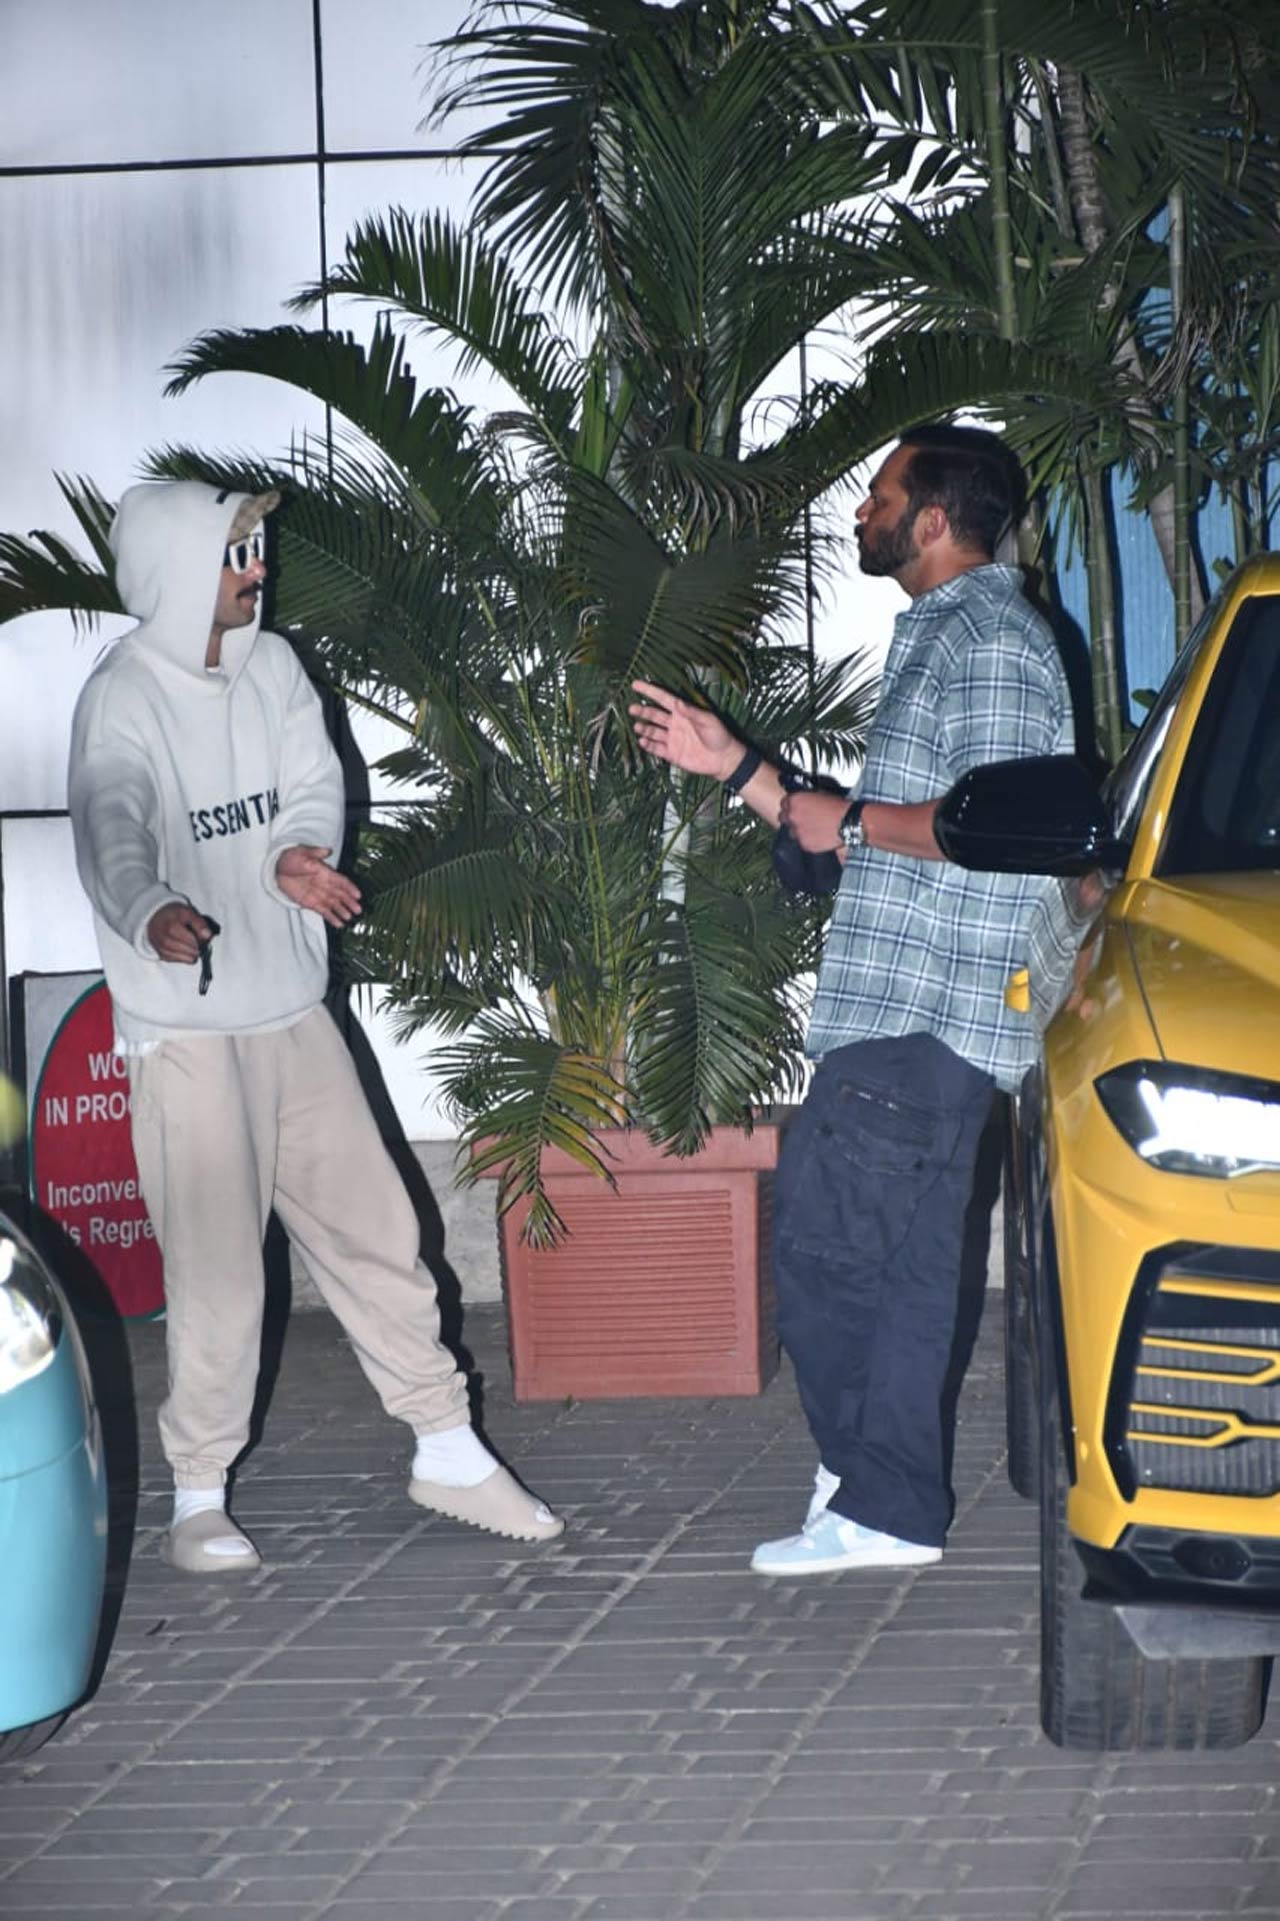 Ranveer Singh was clicked once again off guard as he was seen discussing something with Rohit Shetty at the Mumbai airport. Are they planning which car to blow next in their new project? Well, only time can tell!